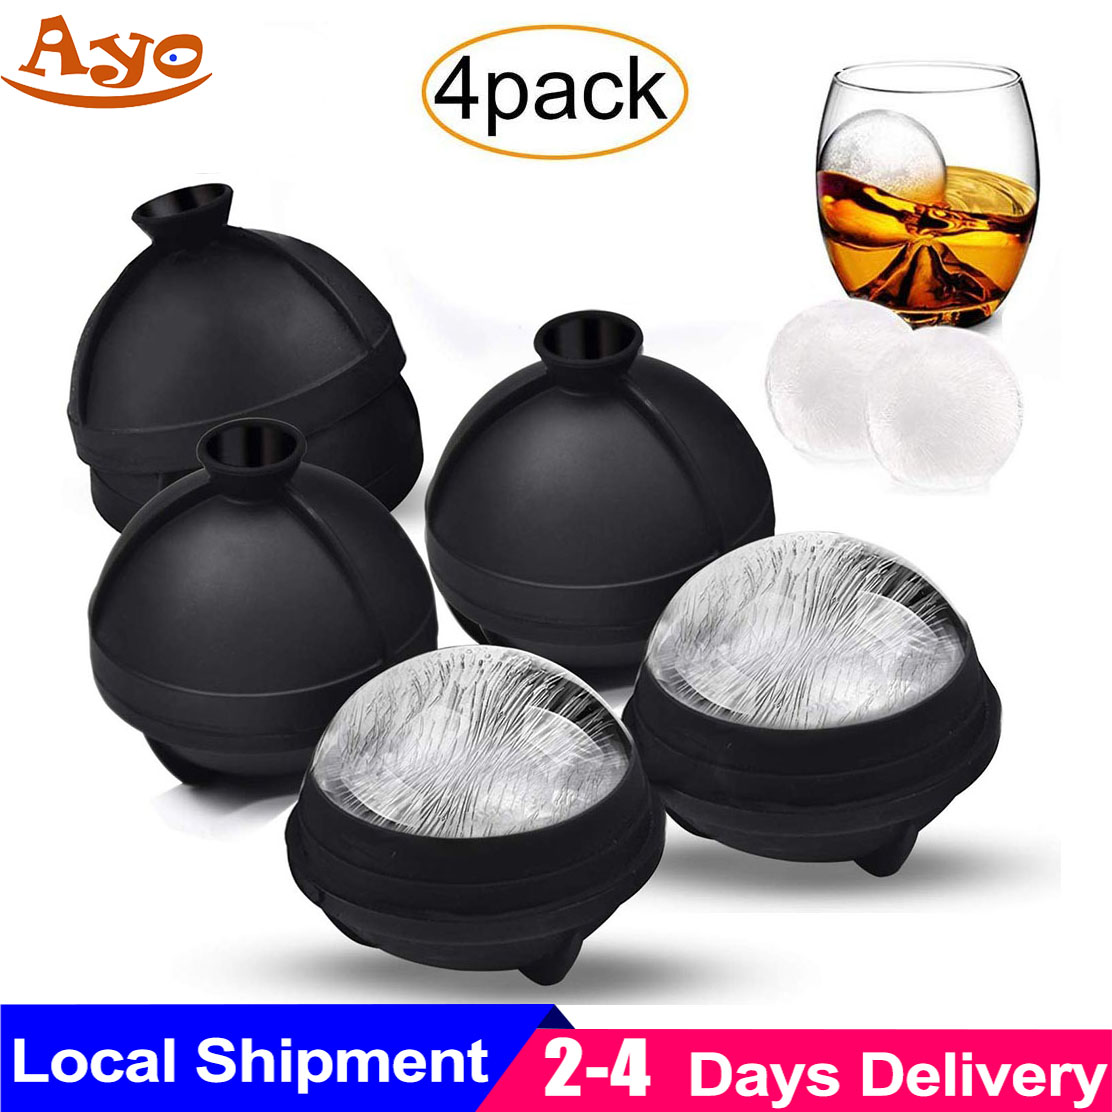 Helpcook Ice Ball Molds 4 Pack - Silicone Sphere Ice Molds with Built-in Funnel - 2.5 inch Round Ice Cube Molds Ice Ball Maker Makes Large Ice Balls